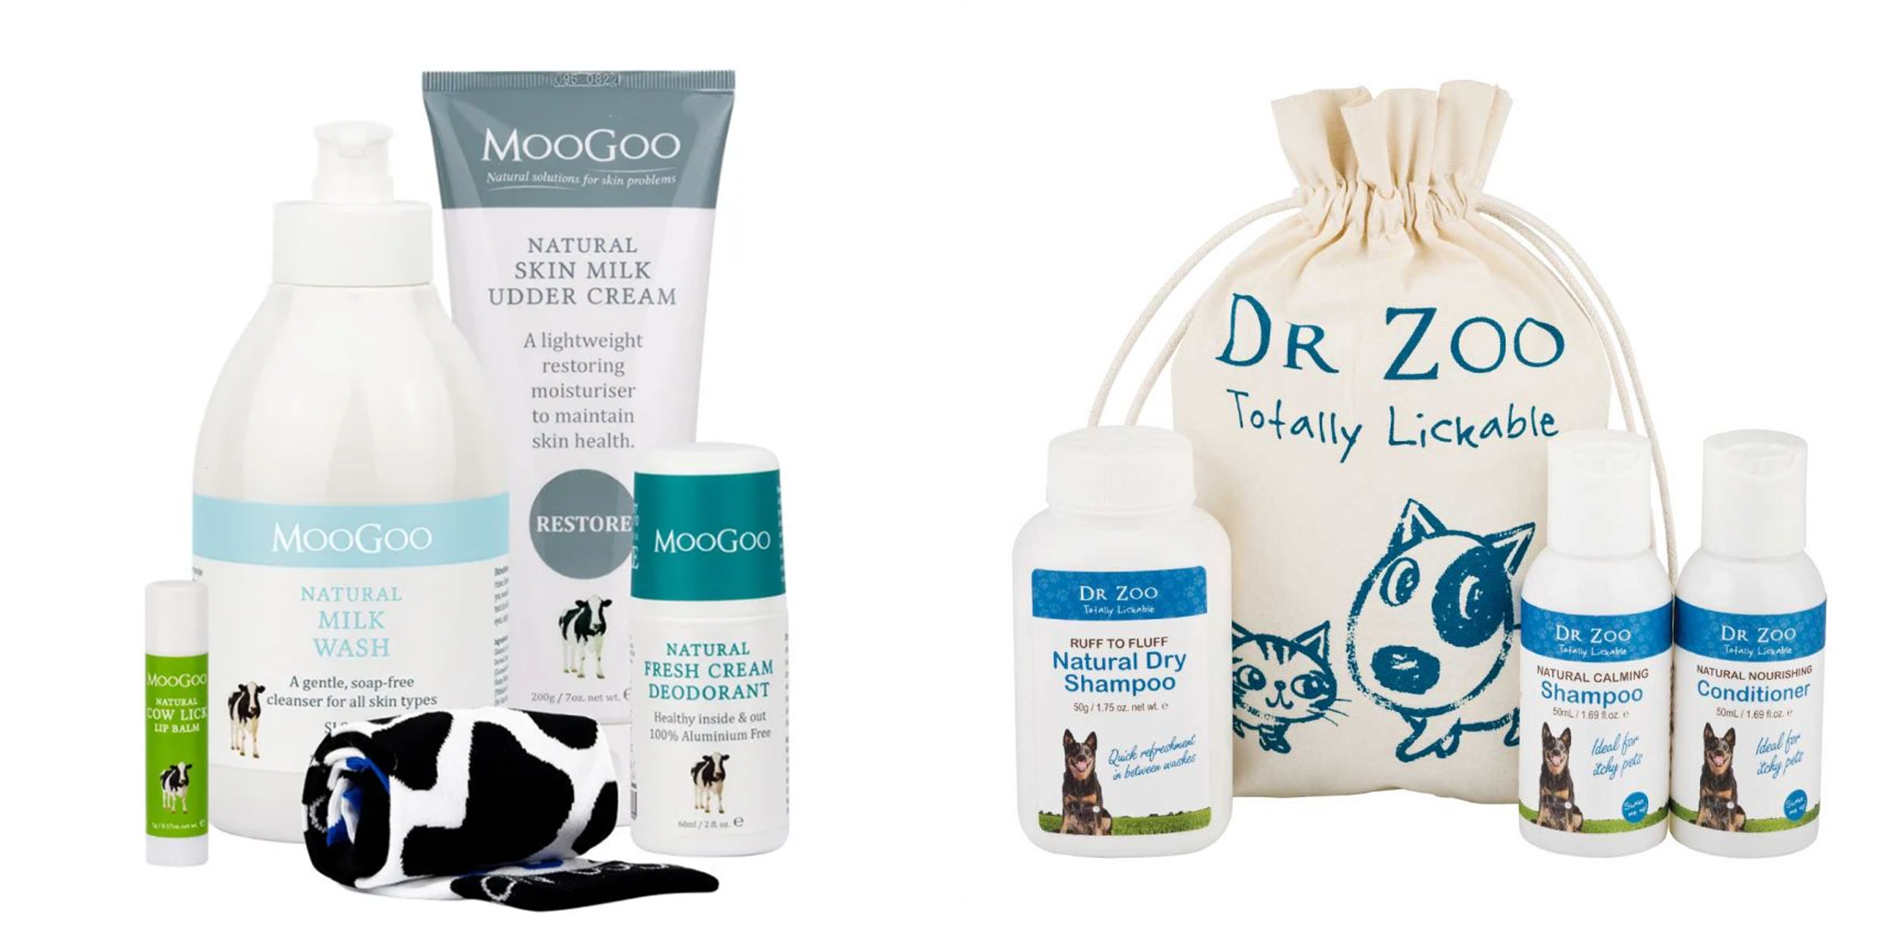 Kirsty Wales Mobile Massage Therapies recommends Moogoo Skincare products.